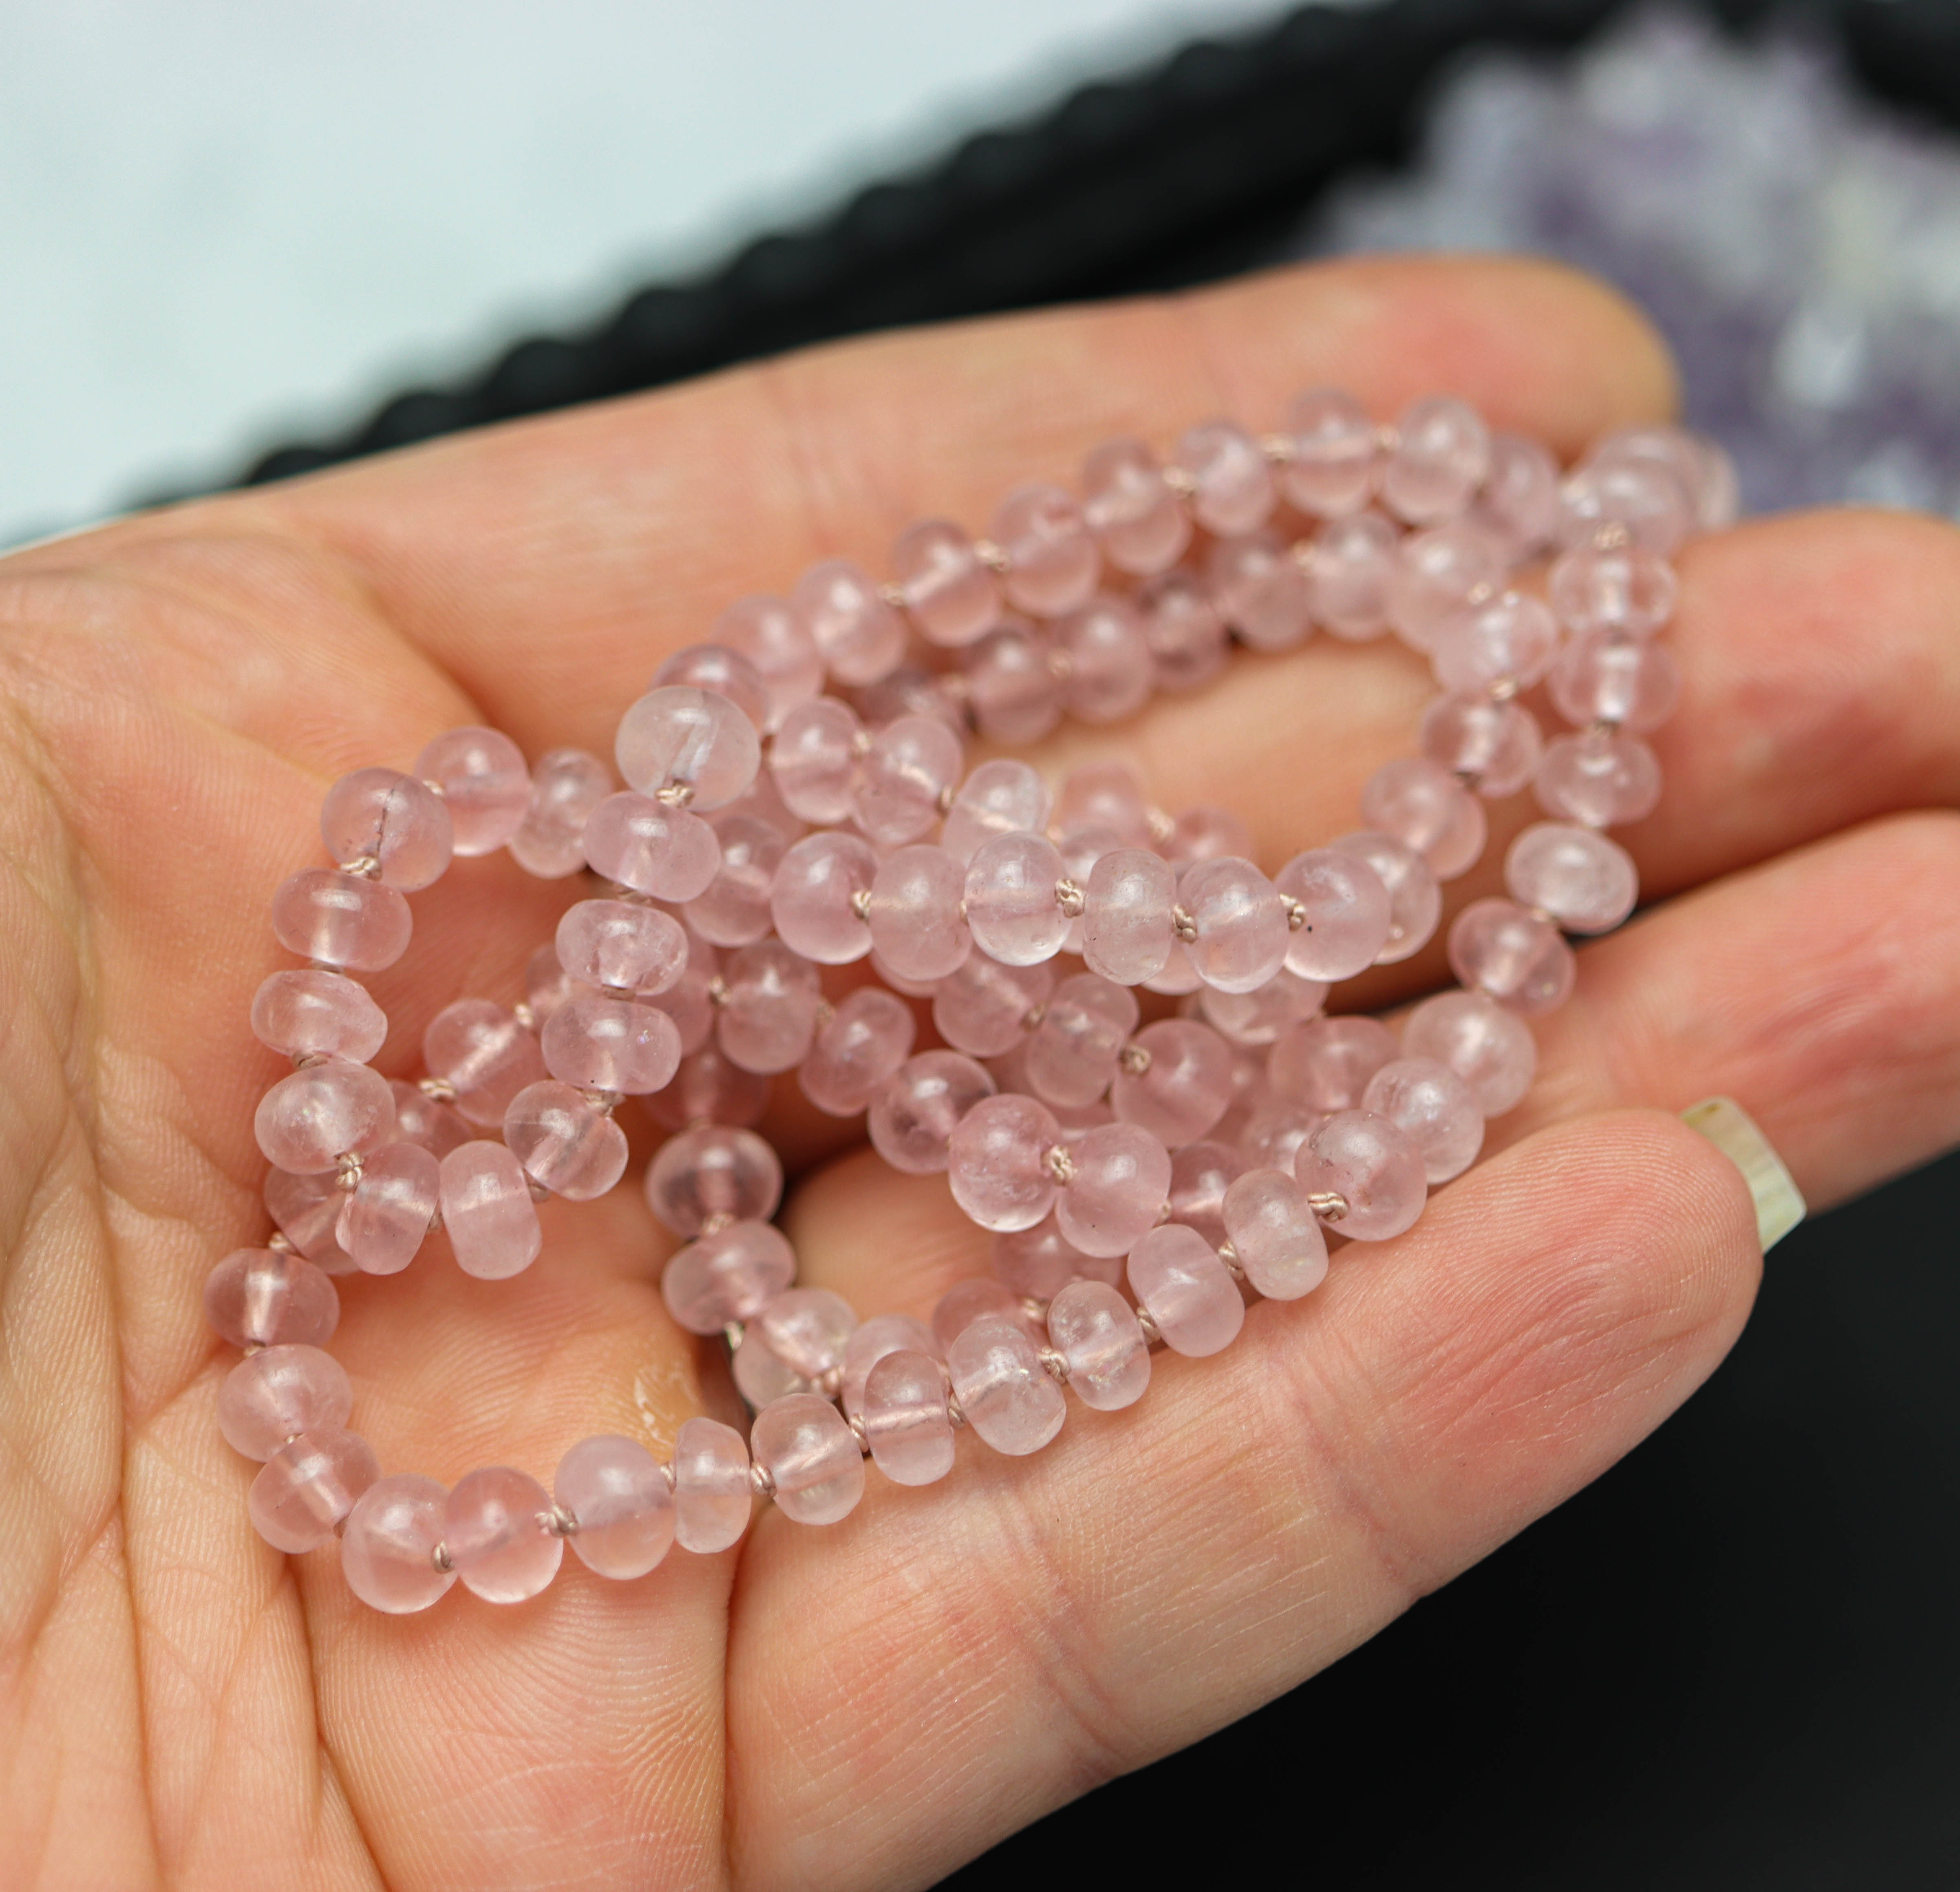 Rose Quartz Hand Knotted Bead Necklace Sterling Silver 18 inch